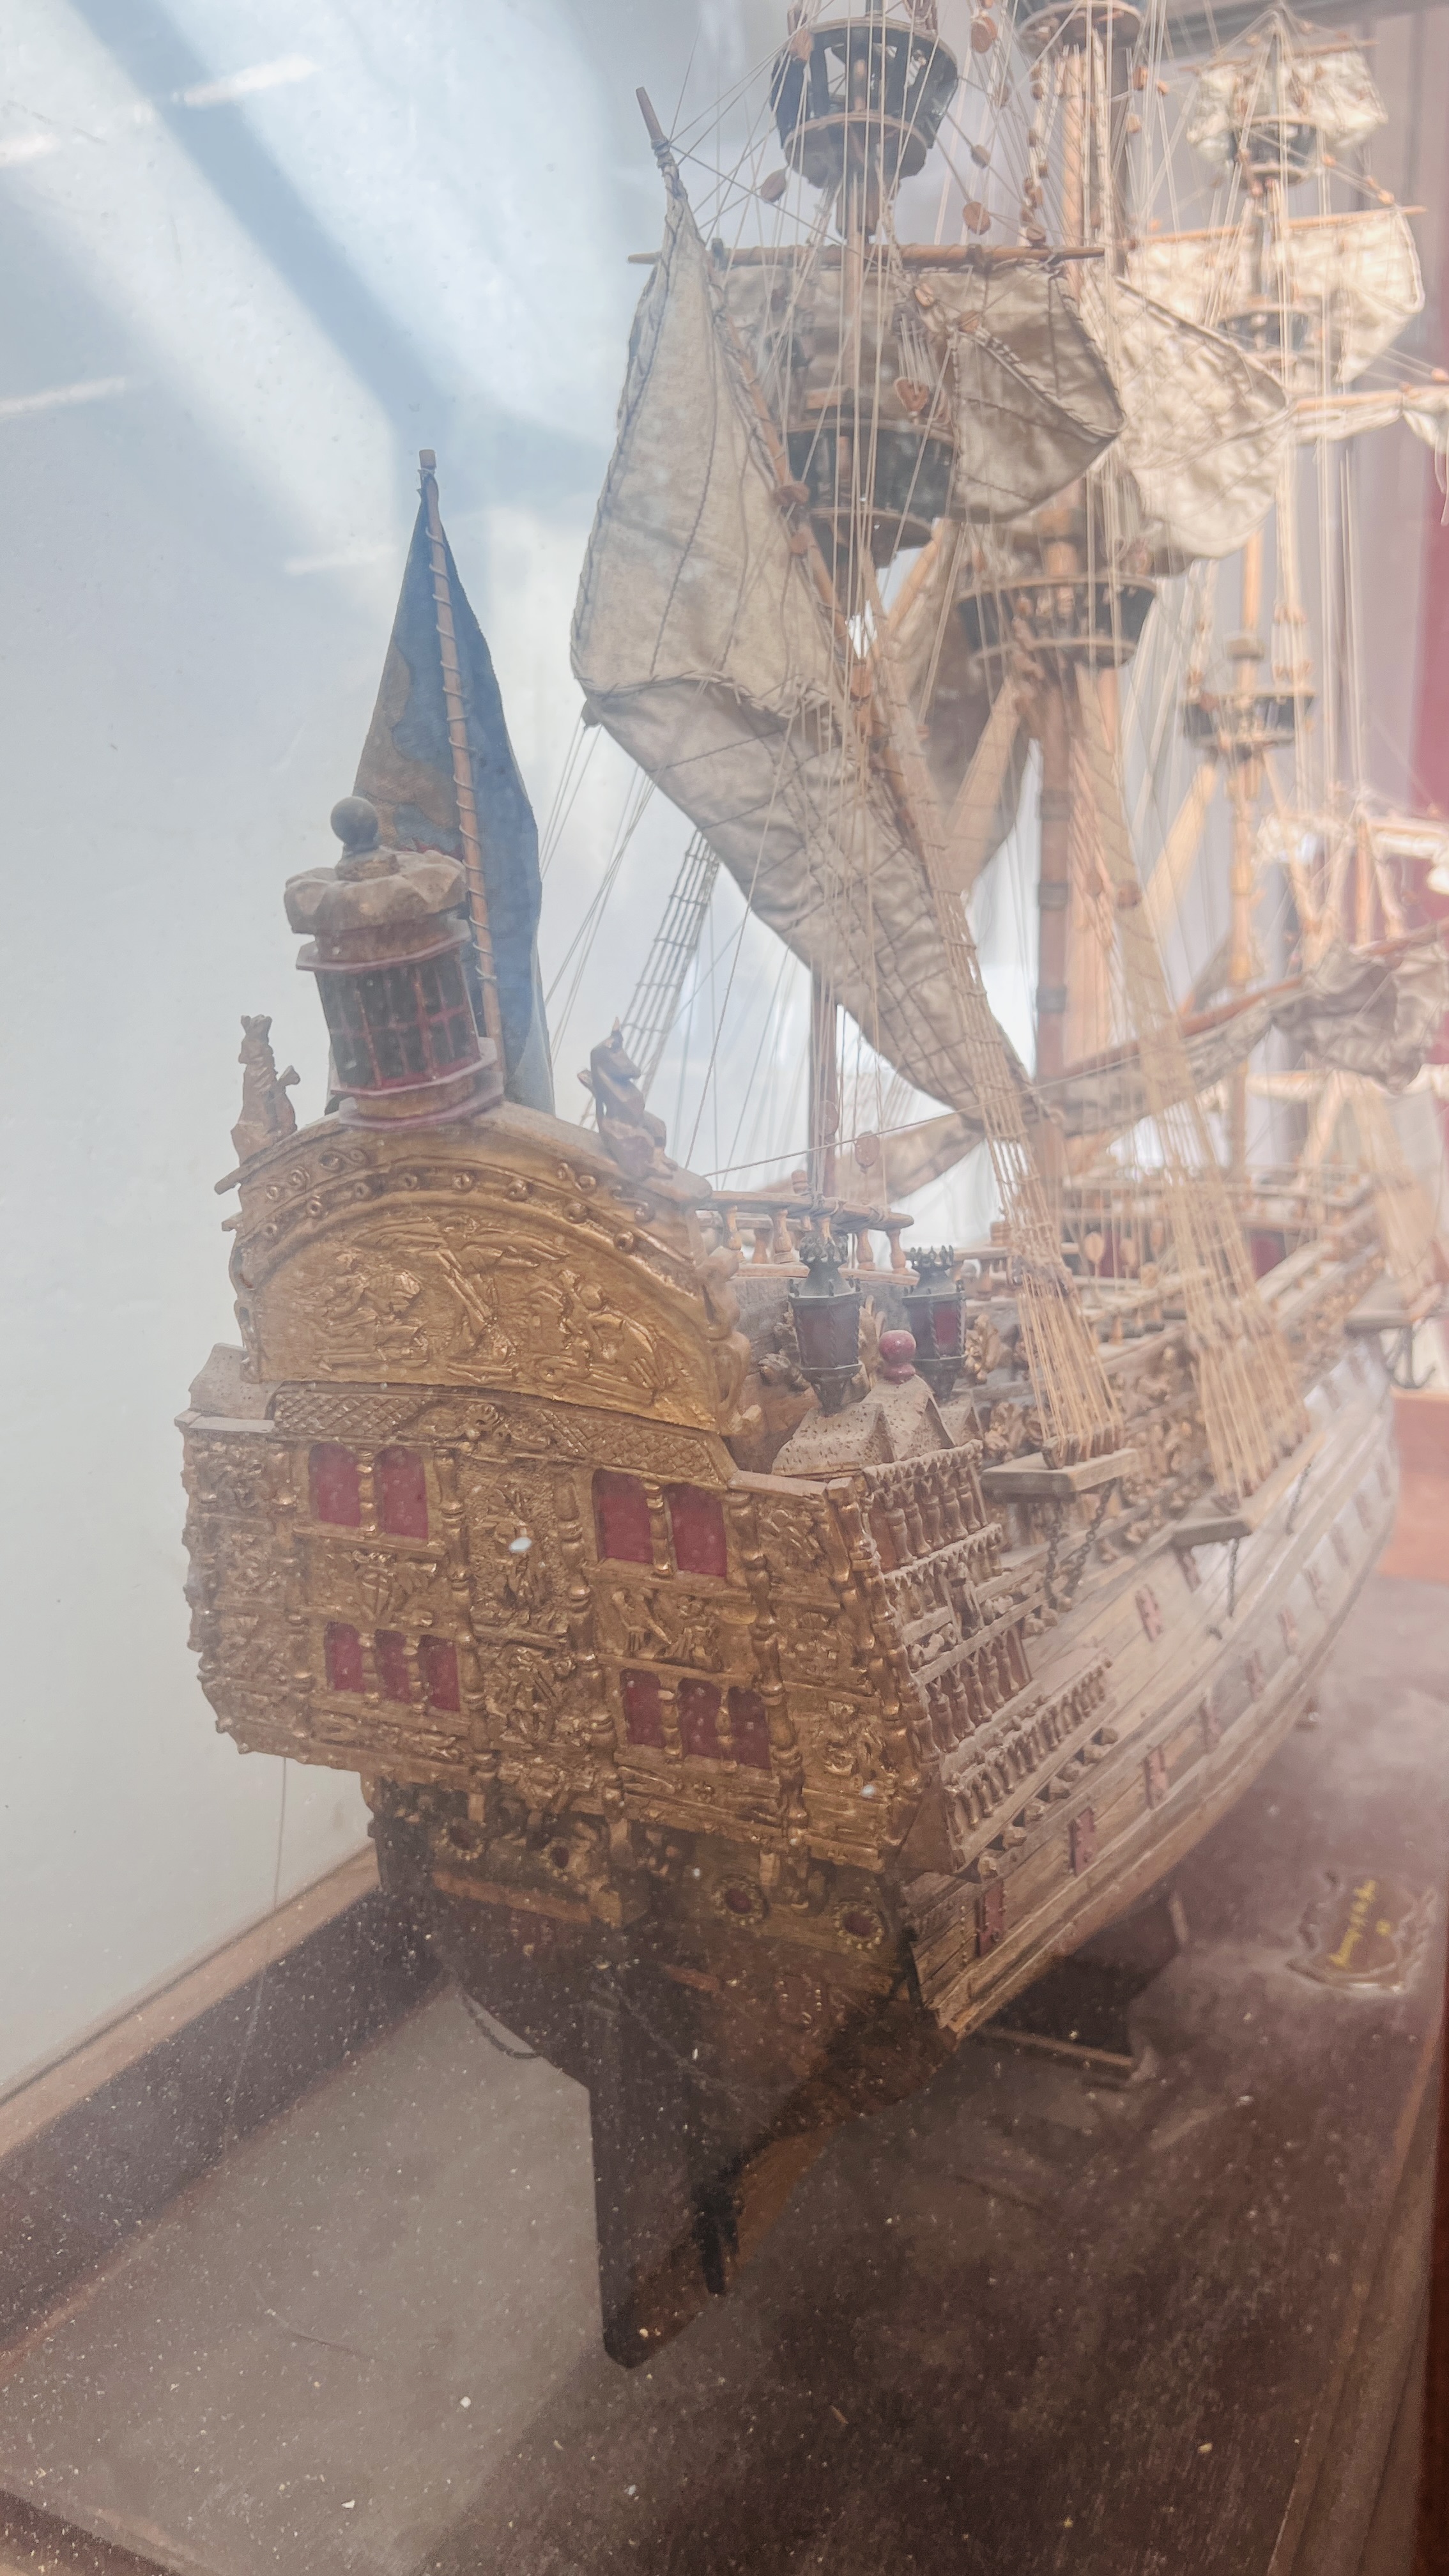 LARGE MODEL GALLEON "SOVEREIGN OF THE SEA" IN MAHOGANY DISPLAY CASE - W 128CM. D 55CM. H 146CM. - Image 9 of 15